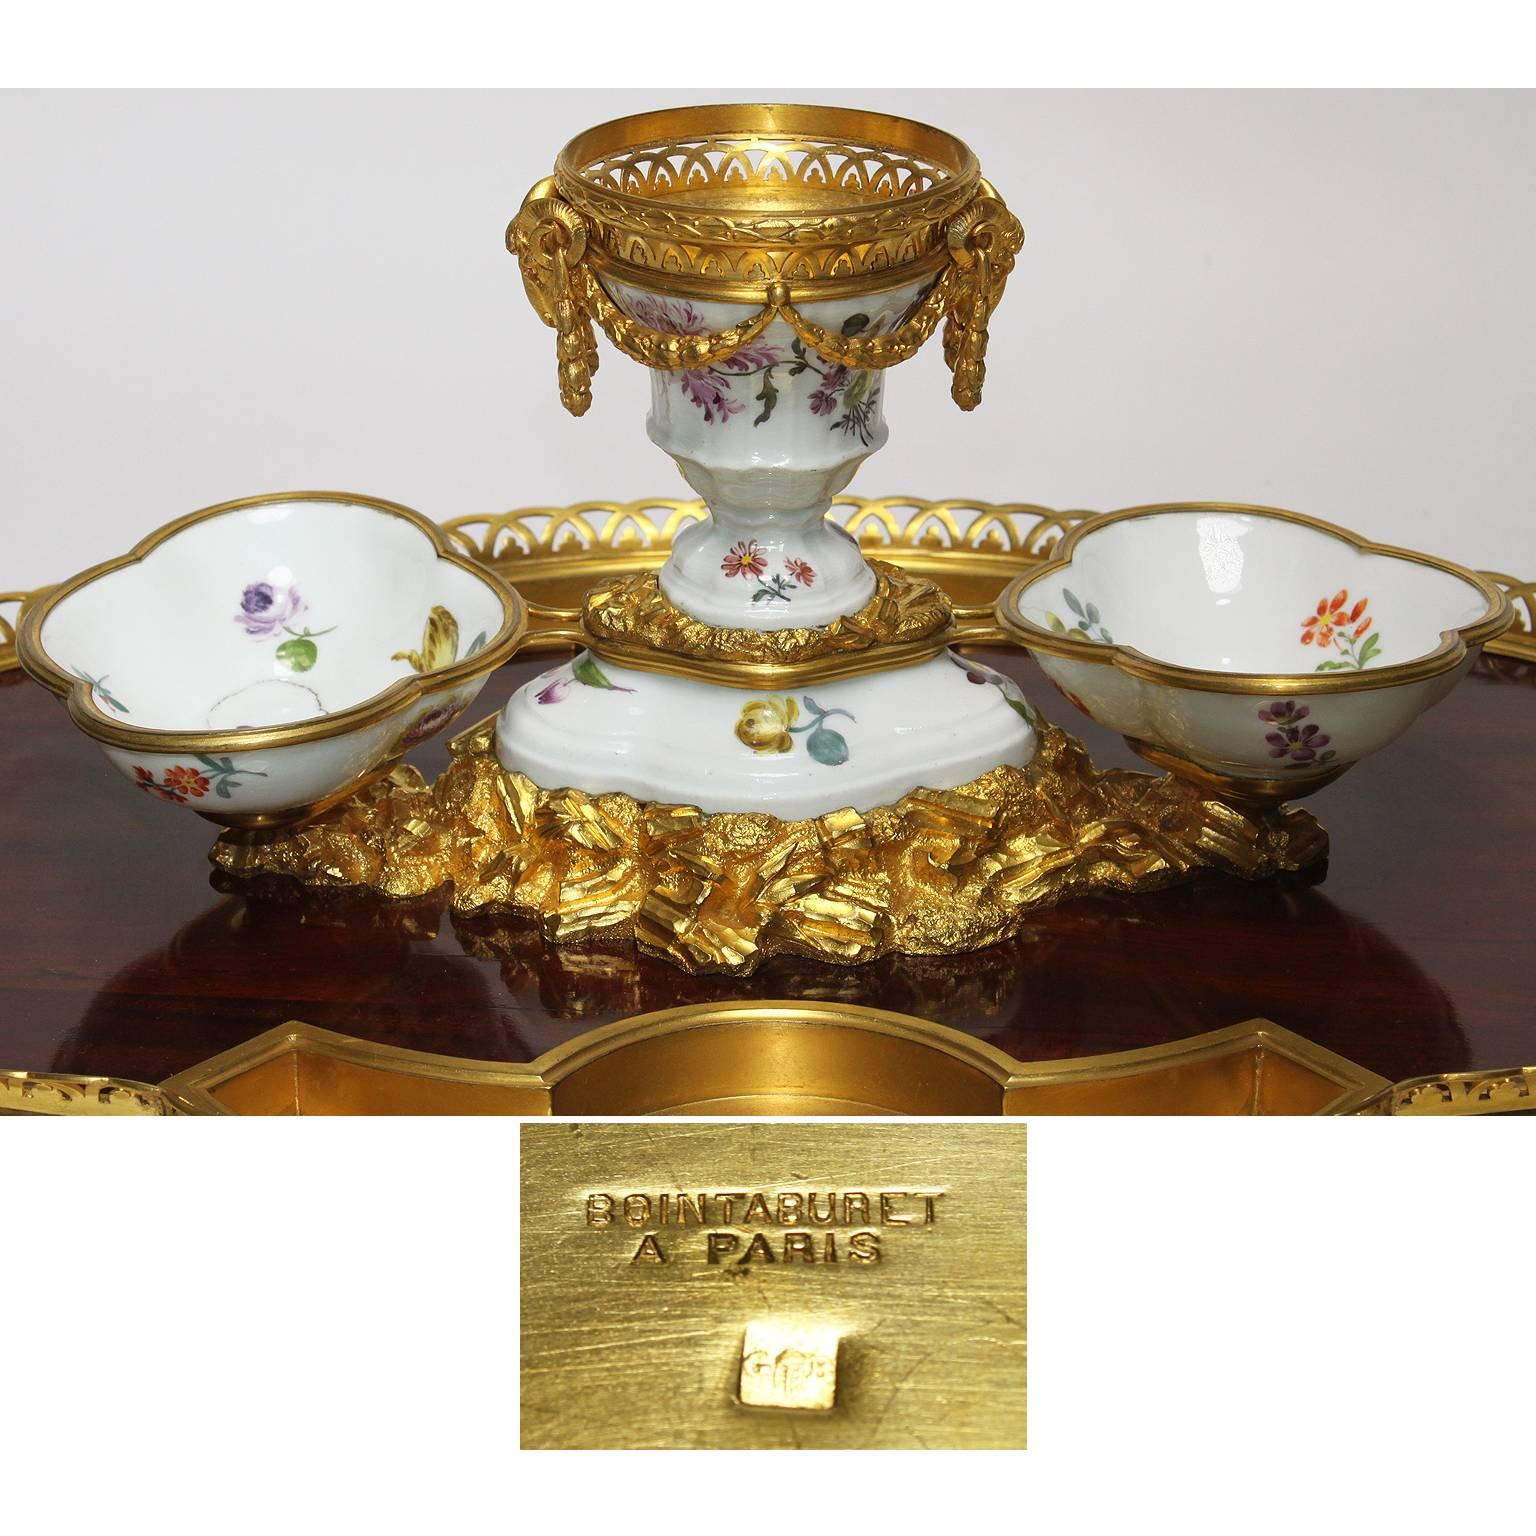 A very fine French 19th century Louis XV style gilt-bronze, mahogany and porcelain Encrier (Inkwell). The oval mahogany base surmounted with an ormolu mounted trim, dual-trays and figures of ram-heads with laurel wreaths on a centre porcelain